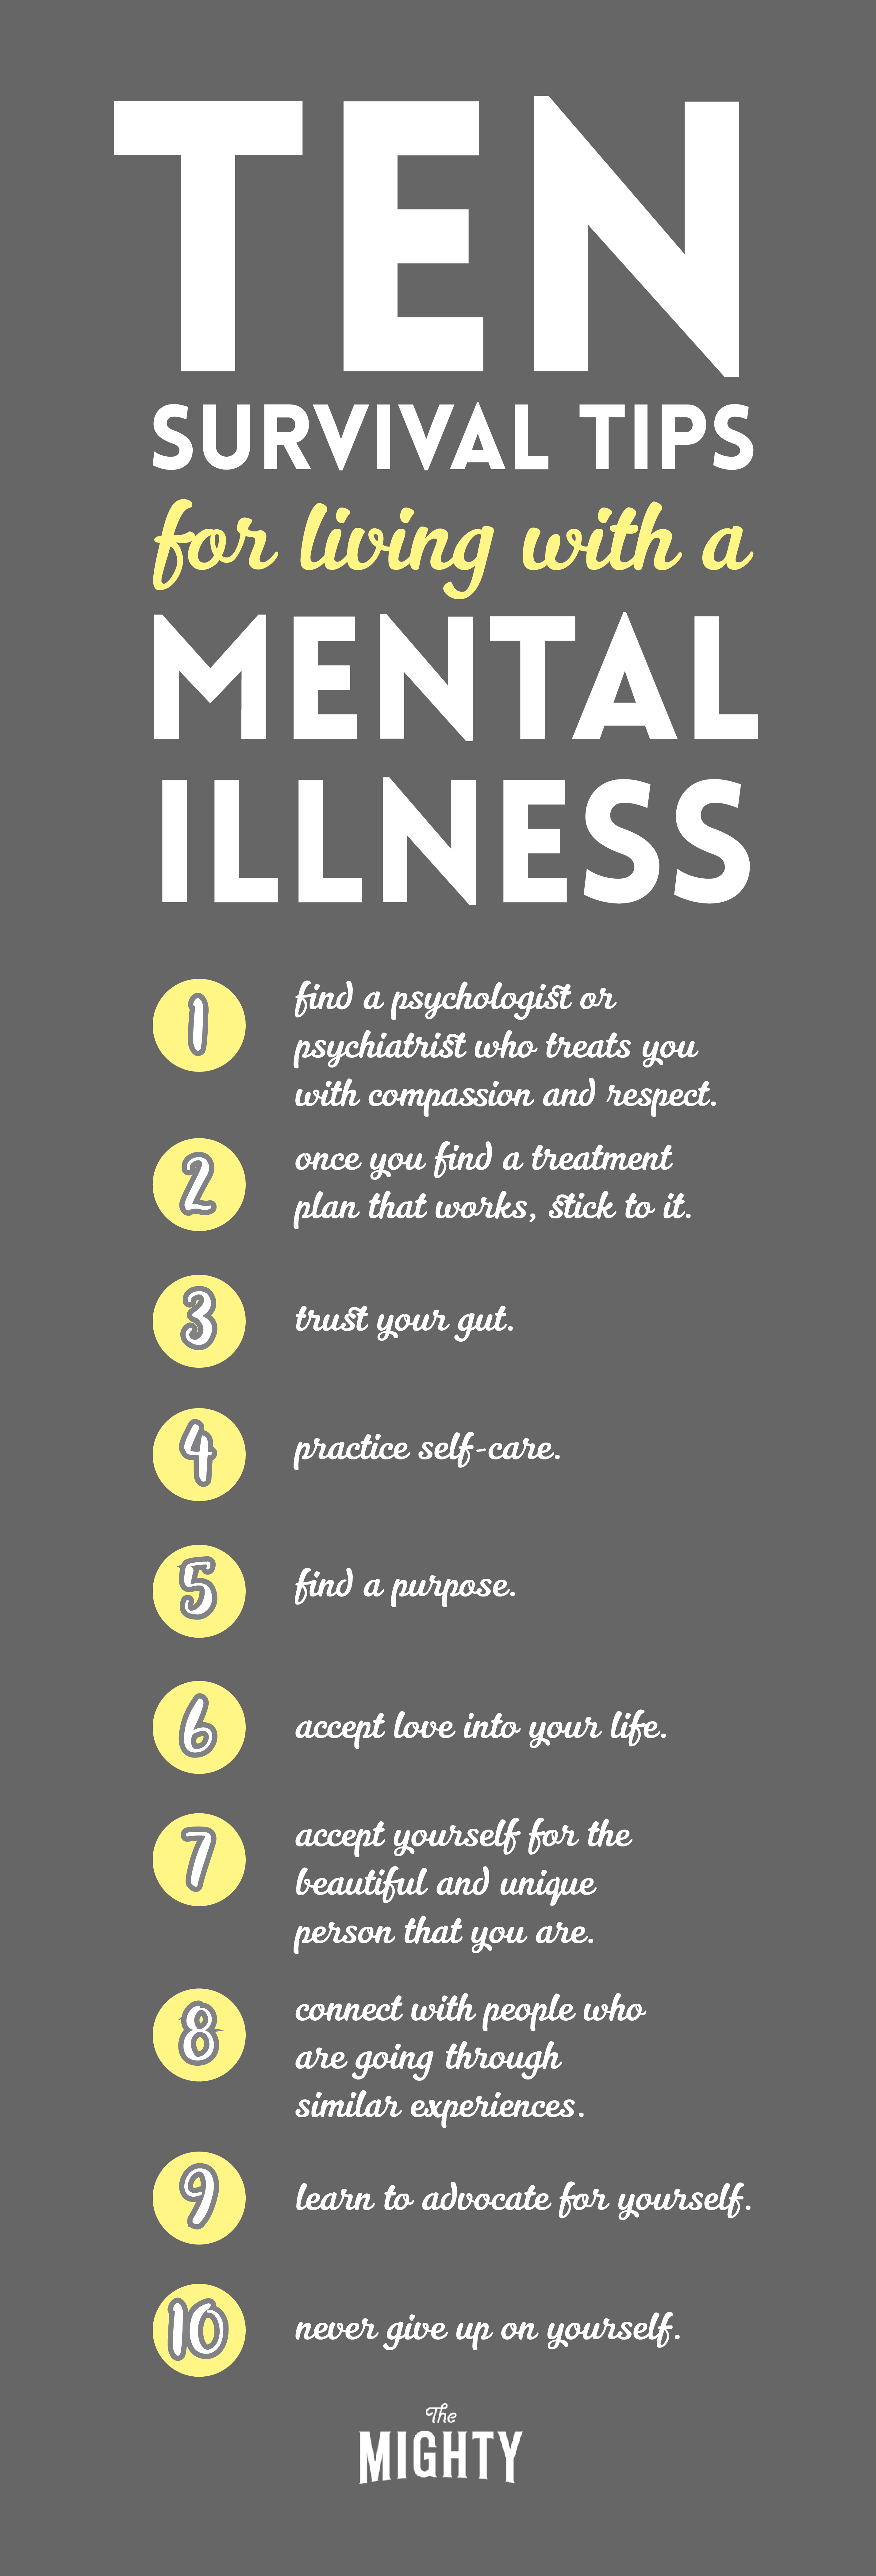 10 Survival Tips For Living With a Mental Illness